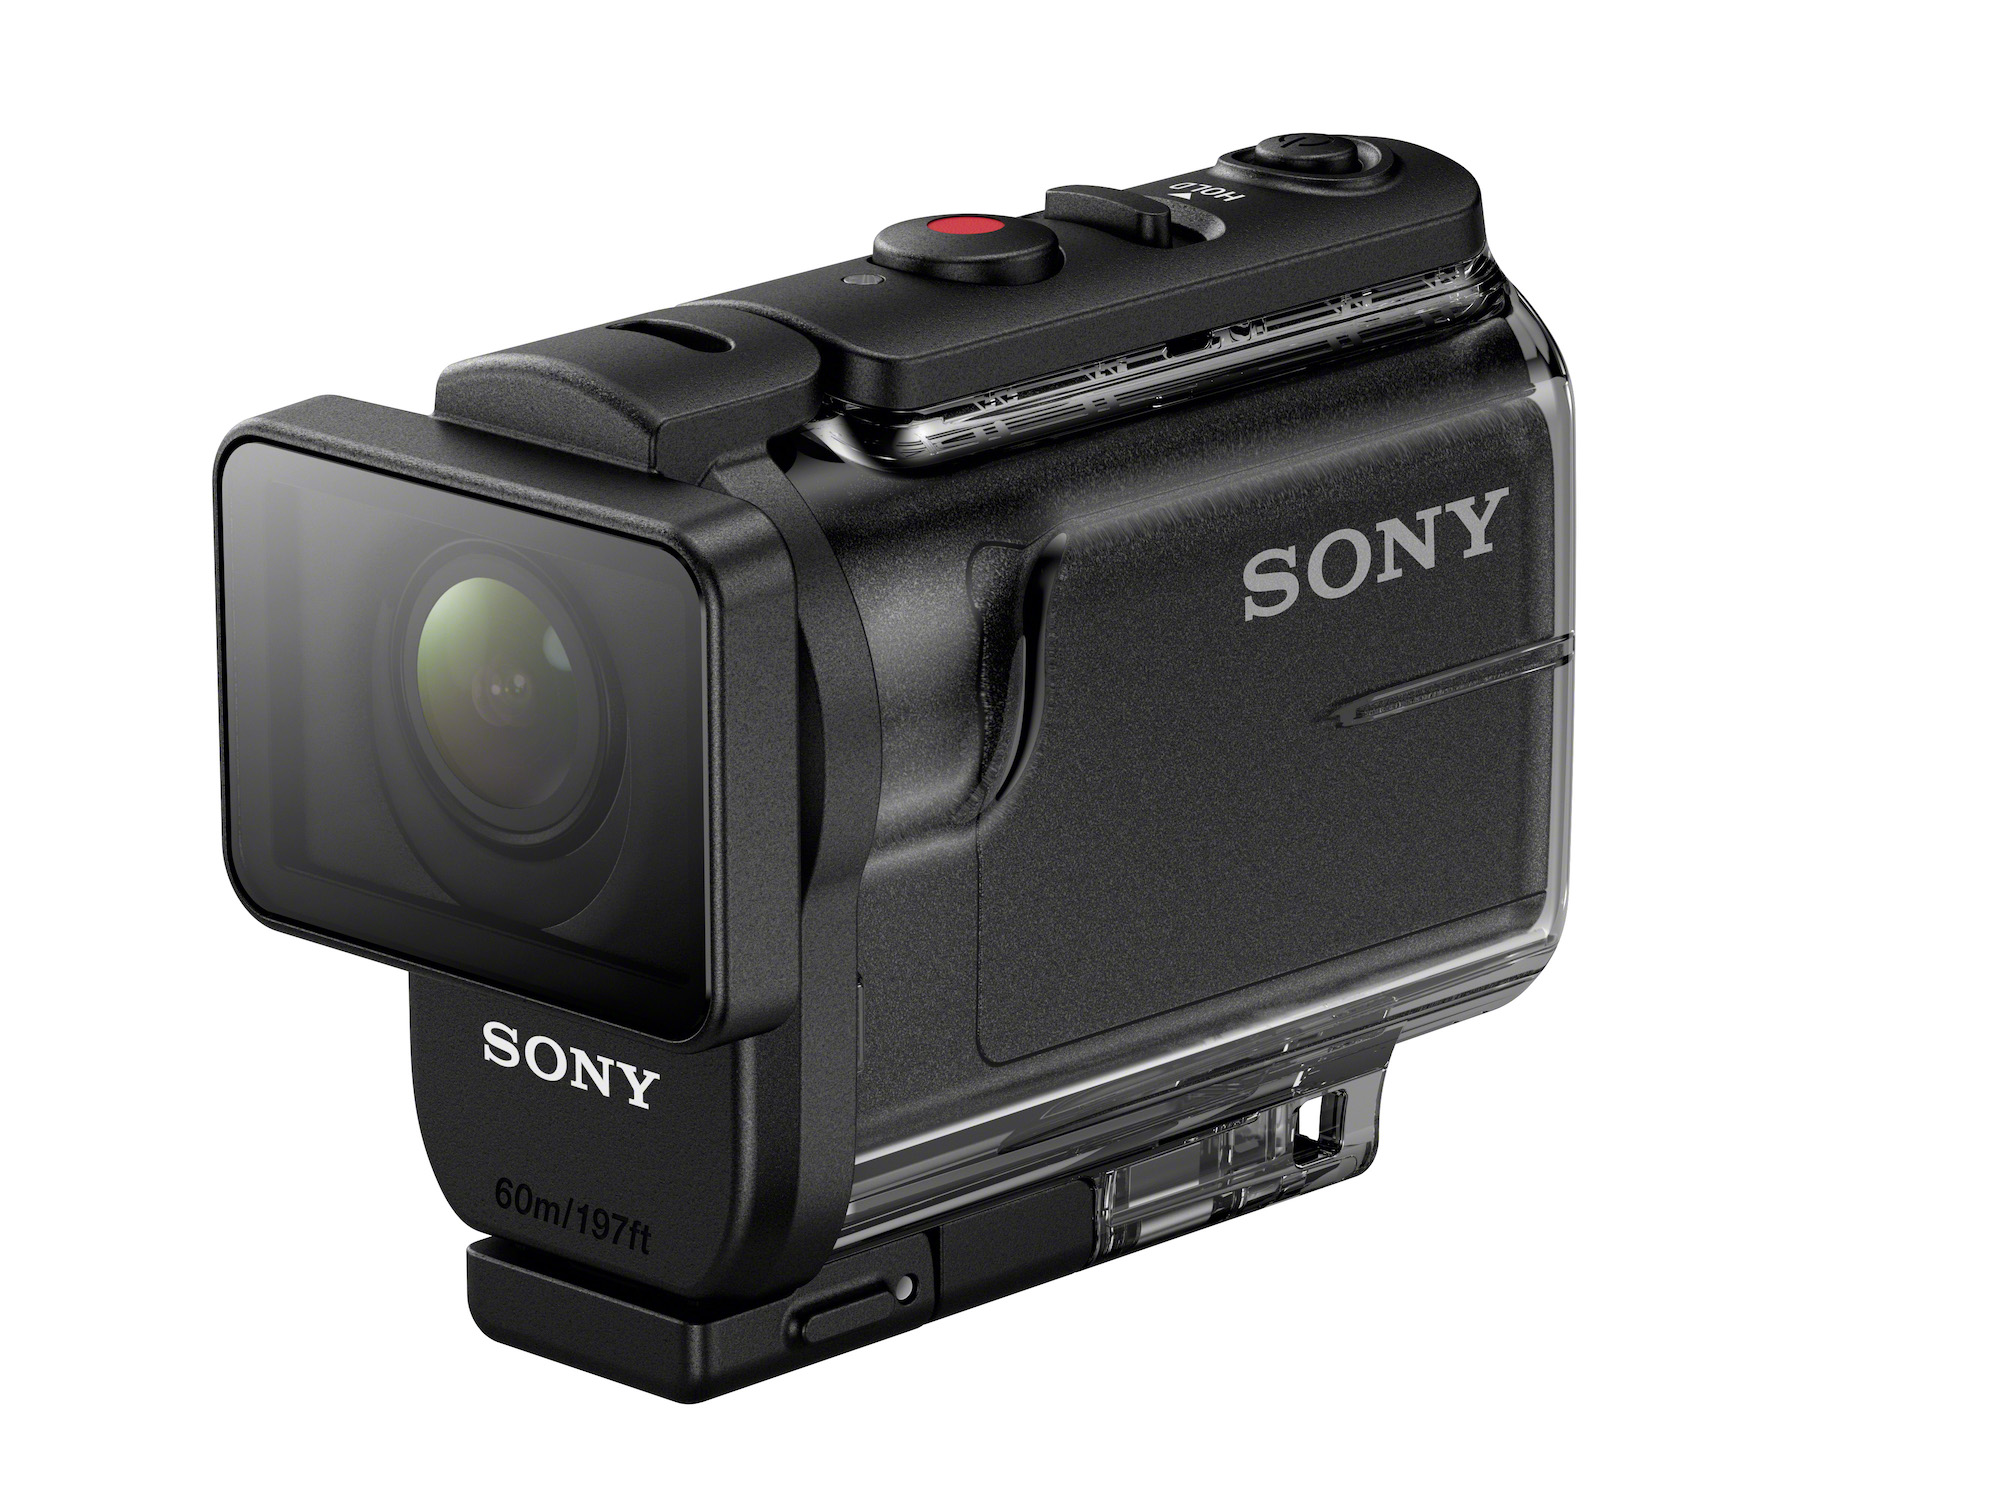 Sony HDR-AS50 Action Cam